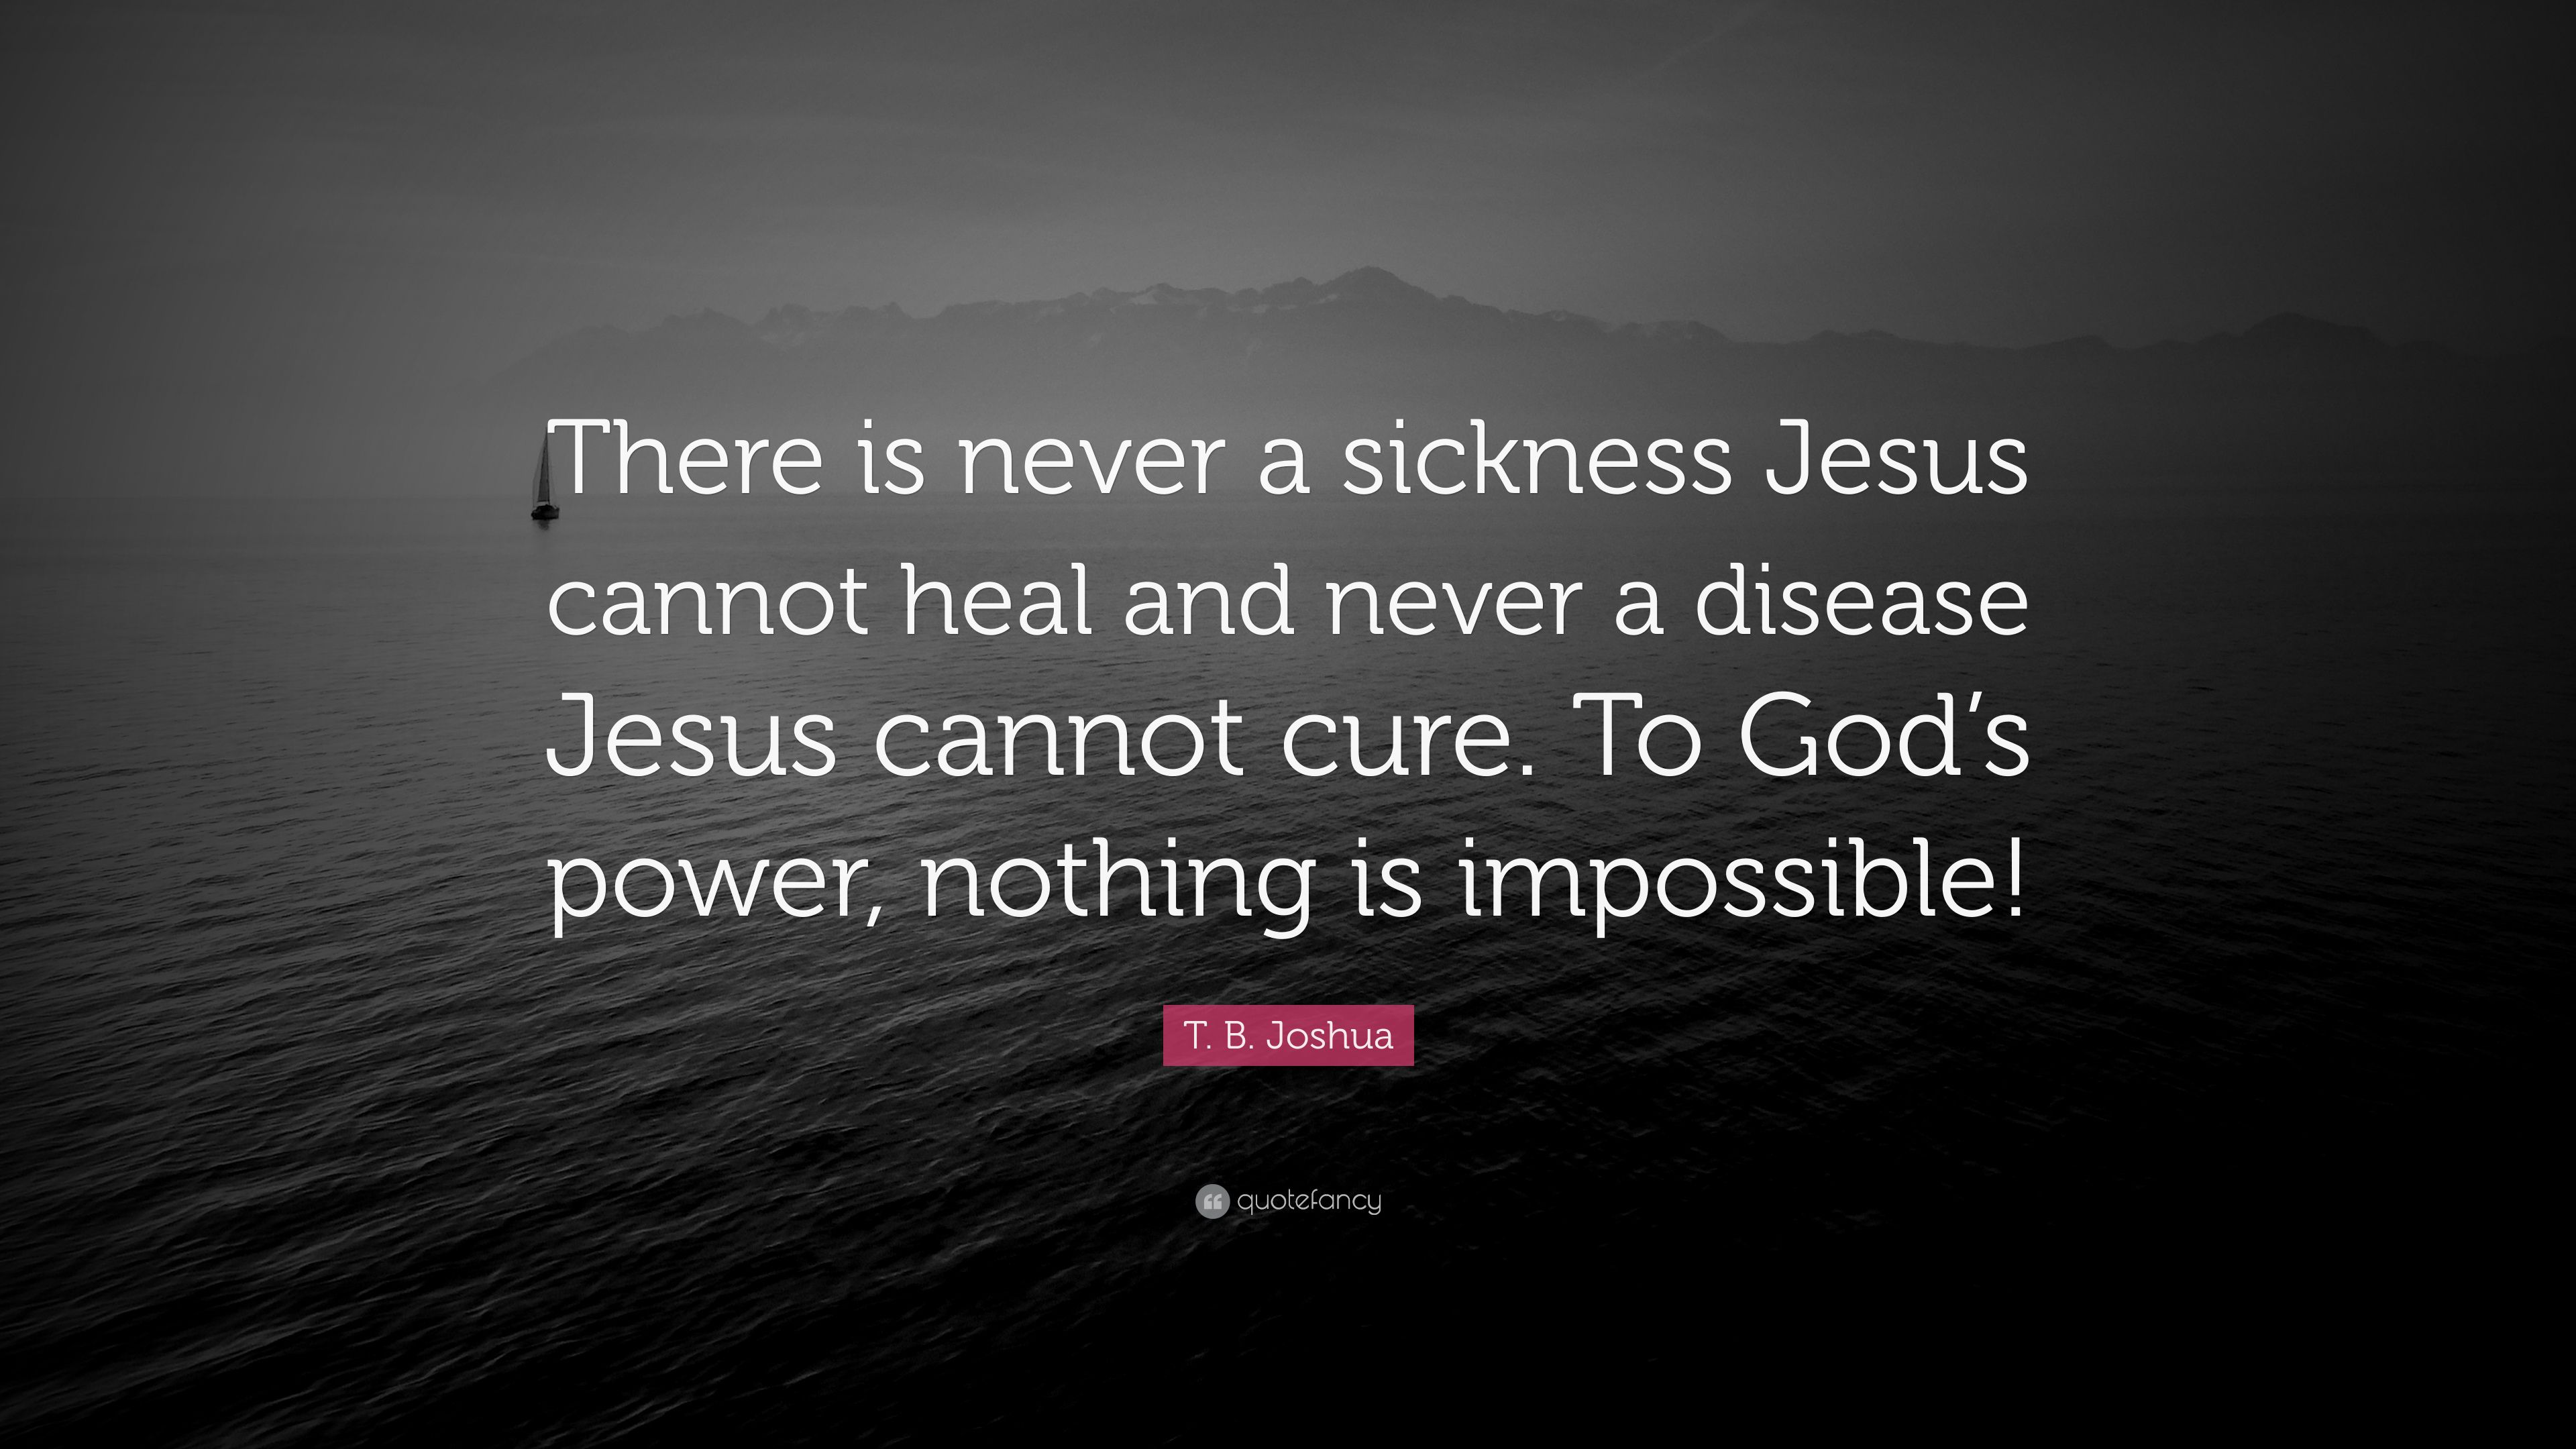 T. B. Joshua Quote: “There is never a sickness Jesus cannot heal and never a disease Jesus cannot cure. To God's power, nothing is impossible.” (7 wallpaper)